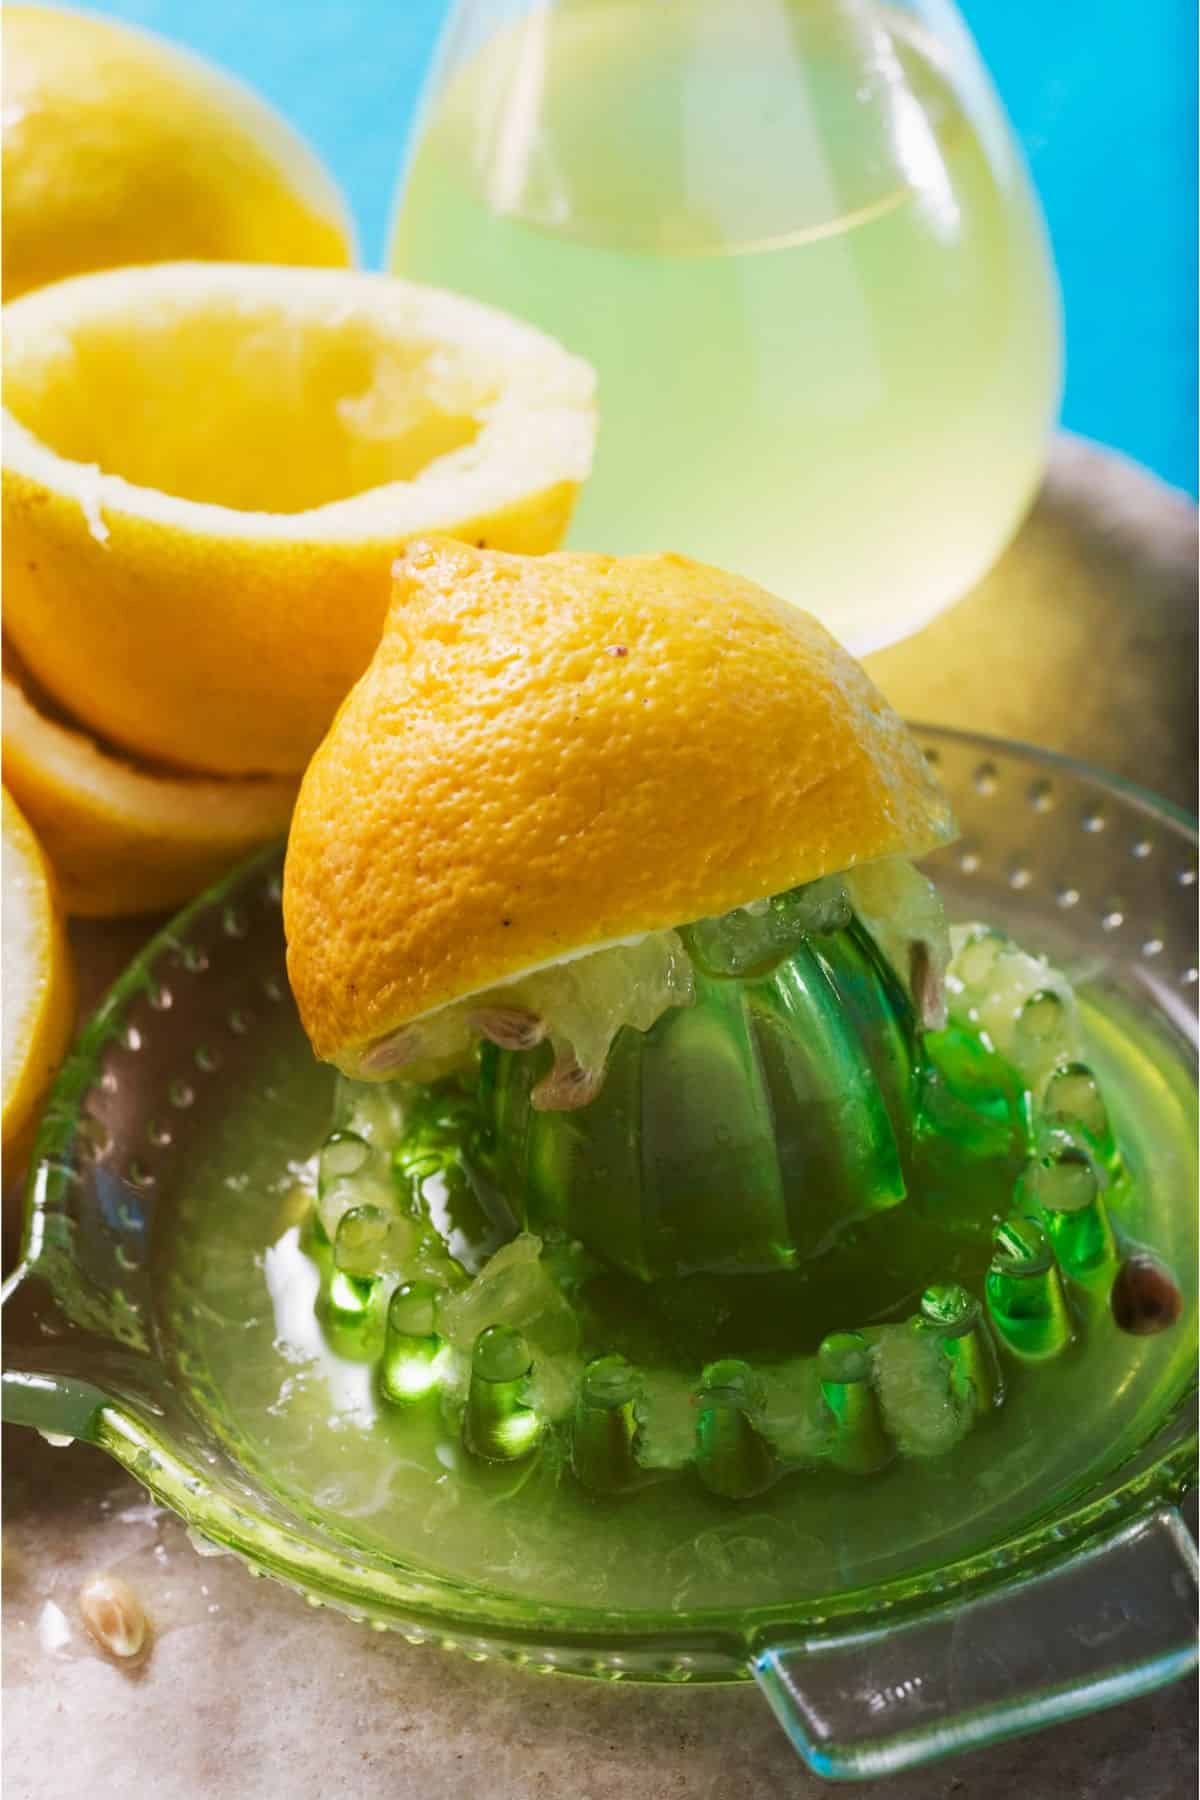 A green handheld lemon juicer with a half of a lemon being juiced on top of it. In the background are already juice lemon halves an a small jug of lemon juice.